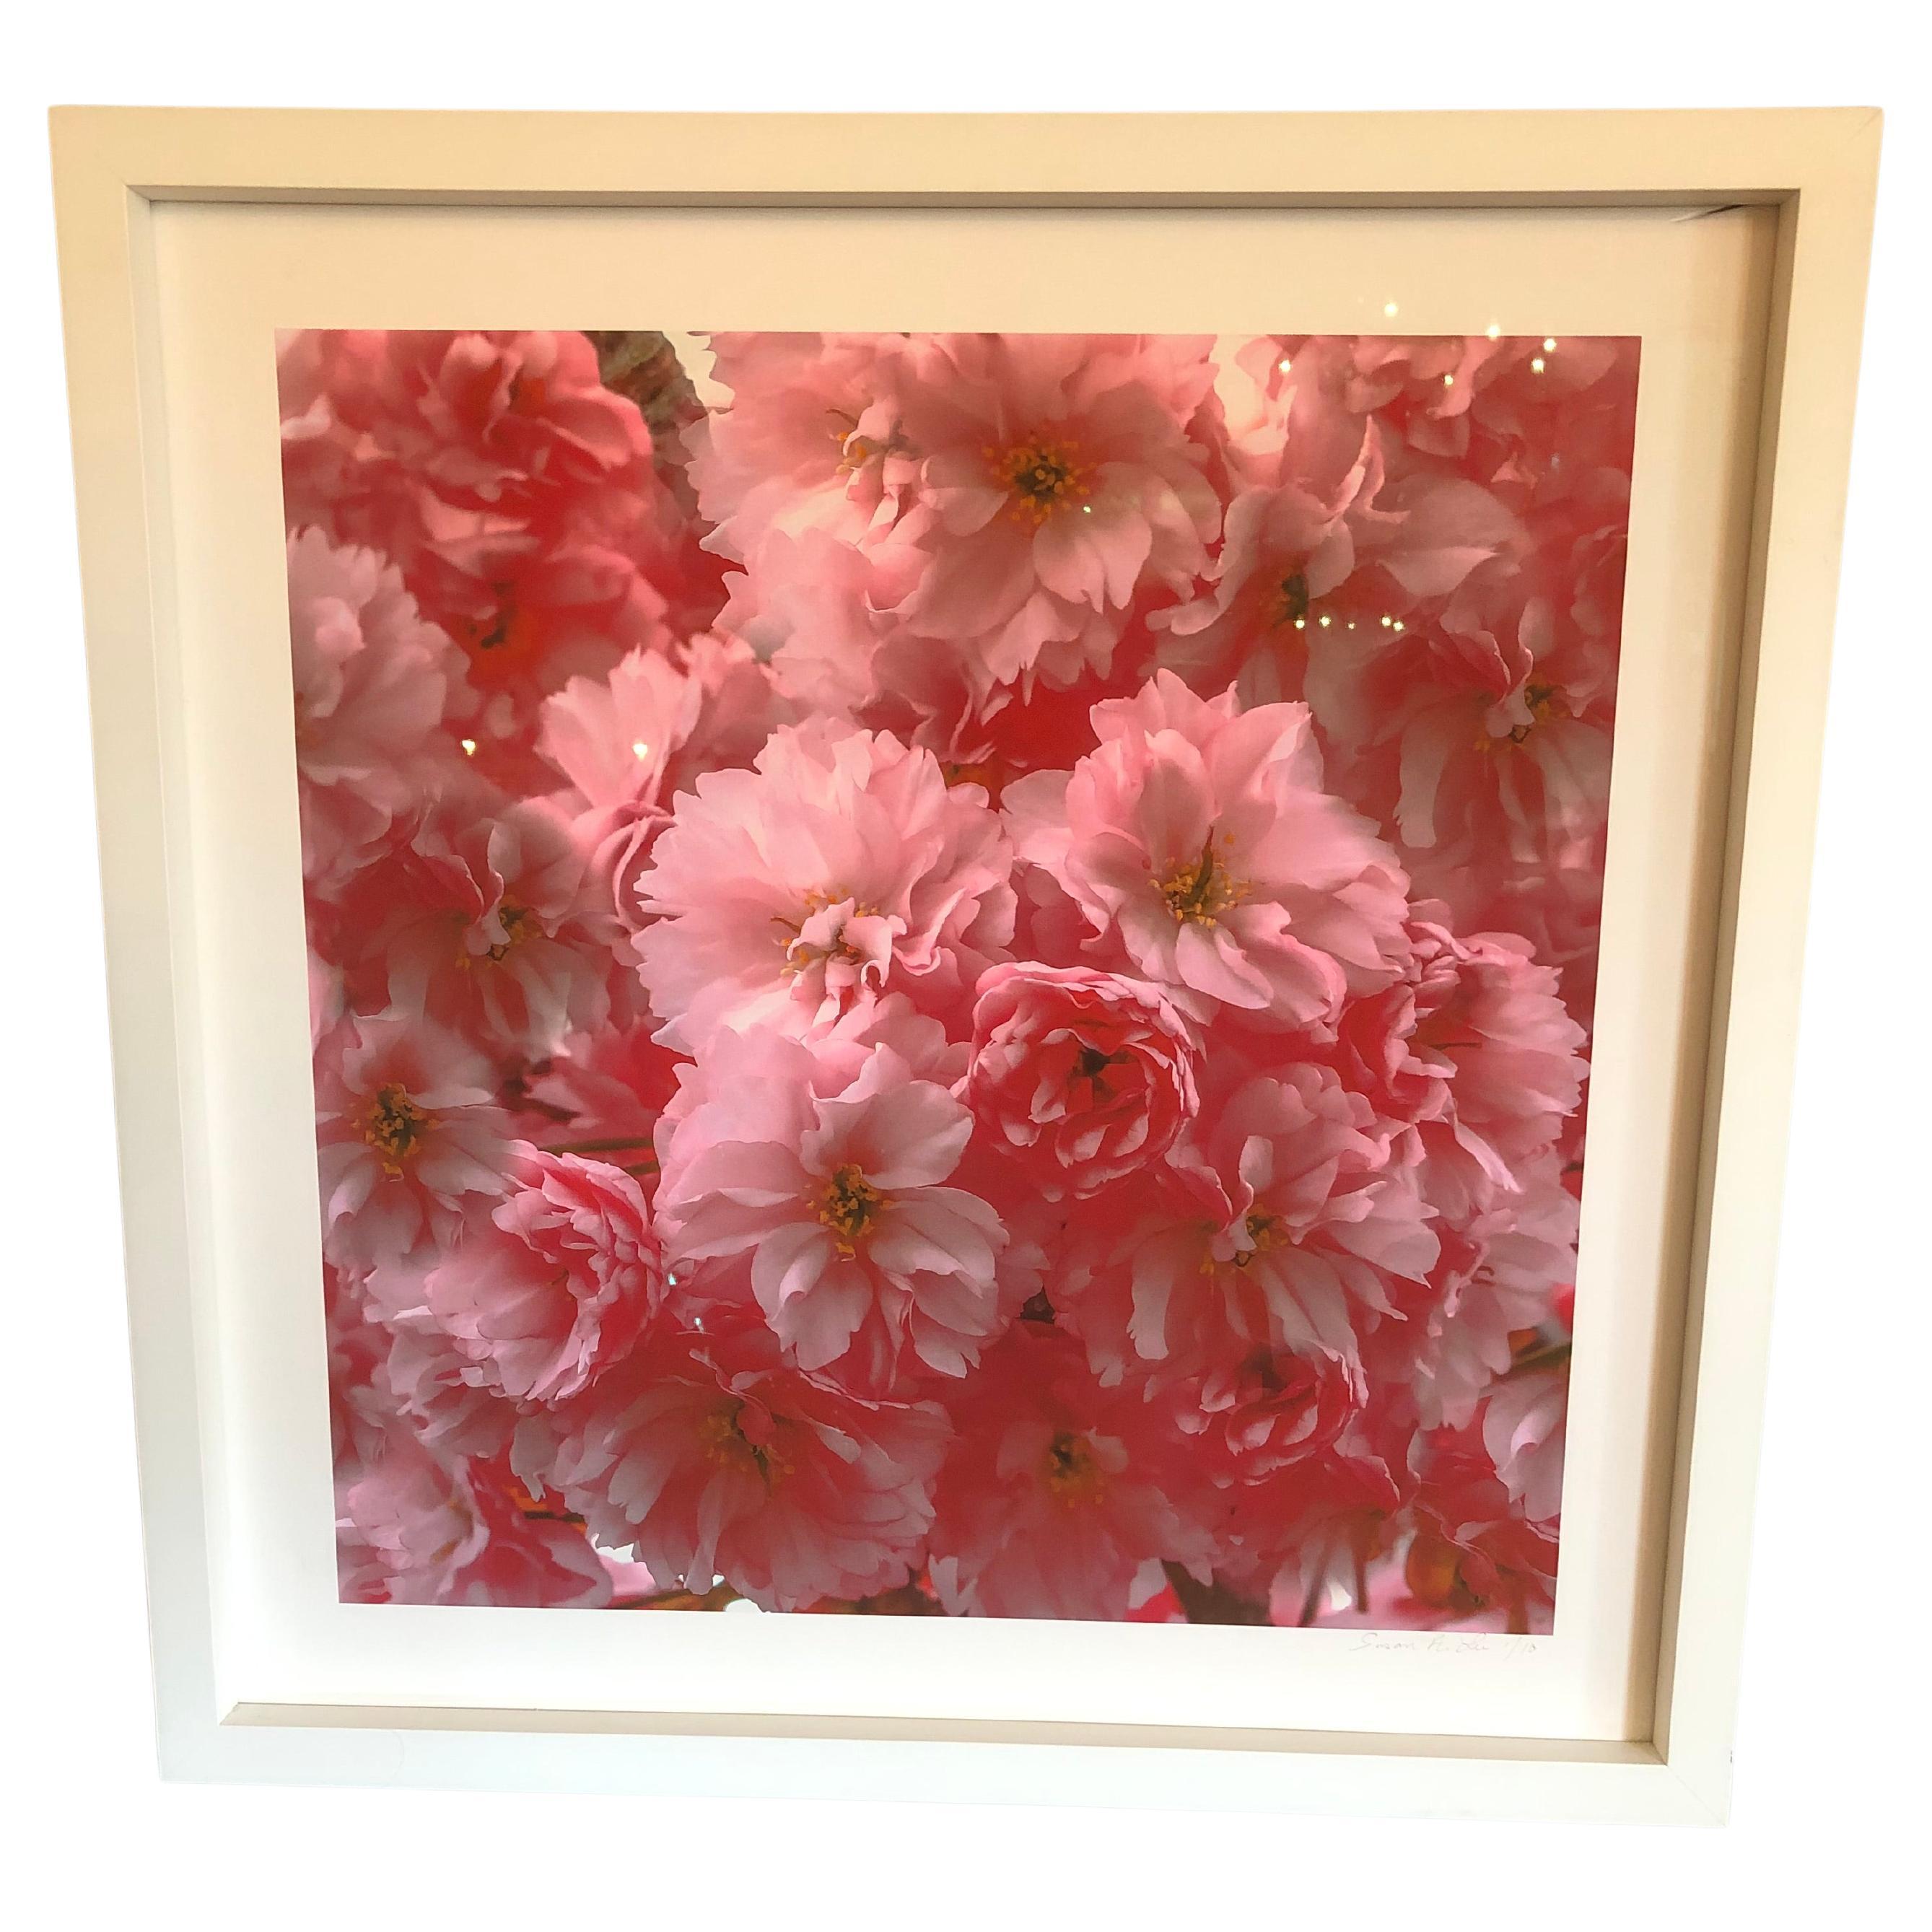 Fragrant Limited Edition High Rez Art Photograph of Cherry Blossoms For Sale